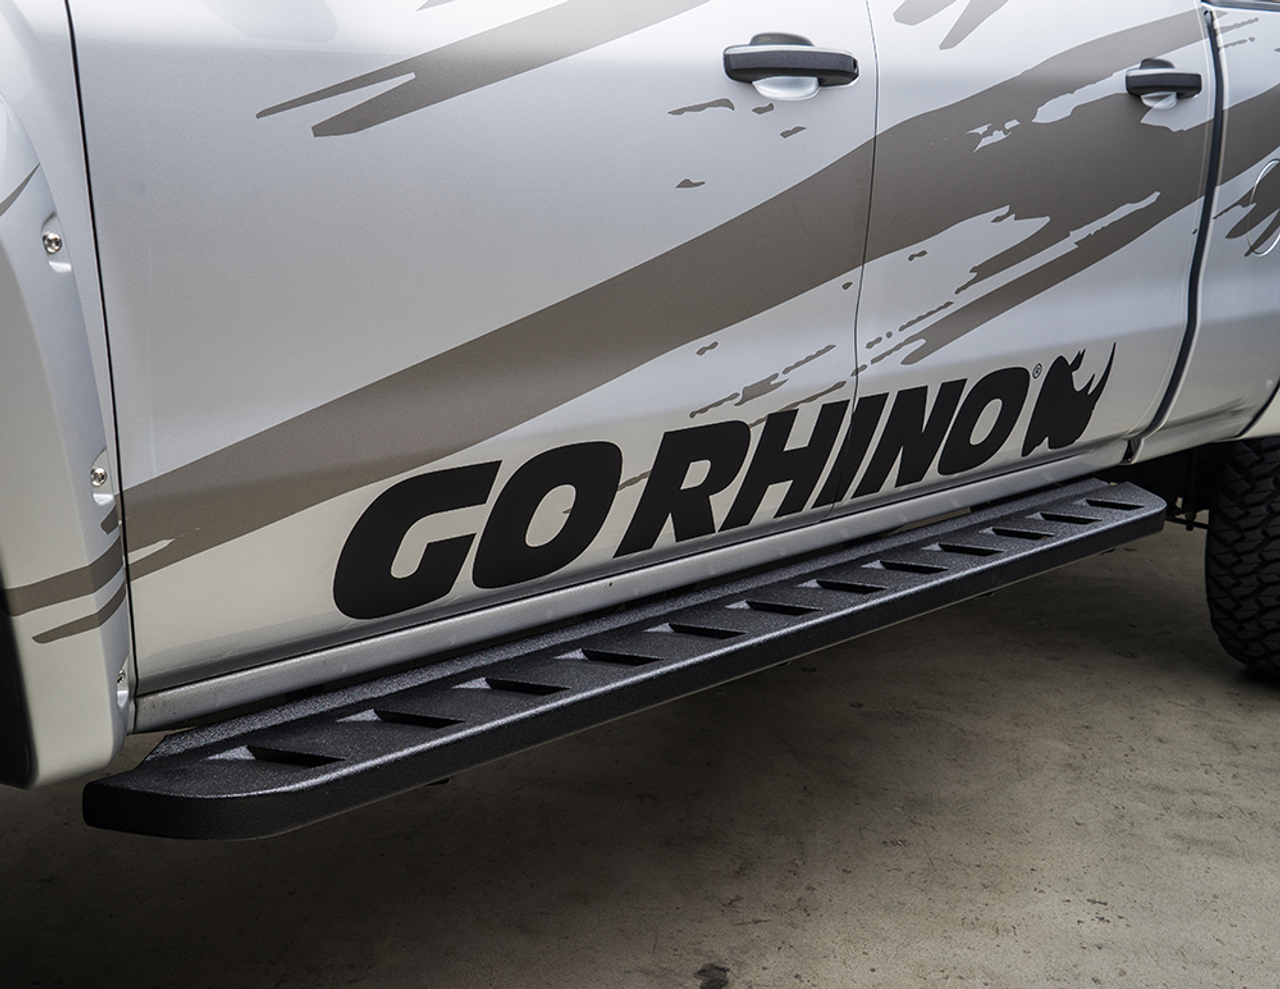 Go Rhino 63404280T Chevrolet, Silverado 2500HD, 3500HD, 2015 - 2019, RB10 Running boards - Complete Kit: RB10 Running boards + Brackets, Galvanized Steel, Protective Bedliner coating, 630080T RB10 + 6940425 RB Brackets, Diesel Only